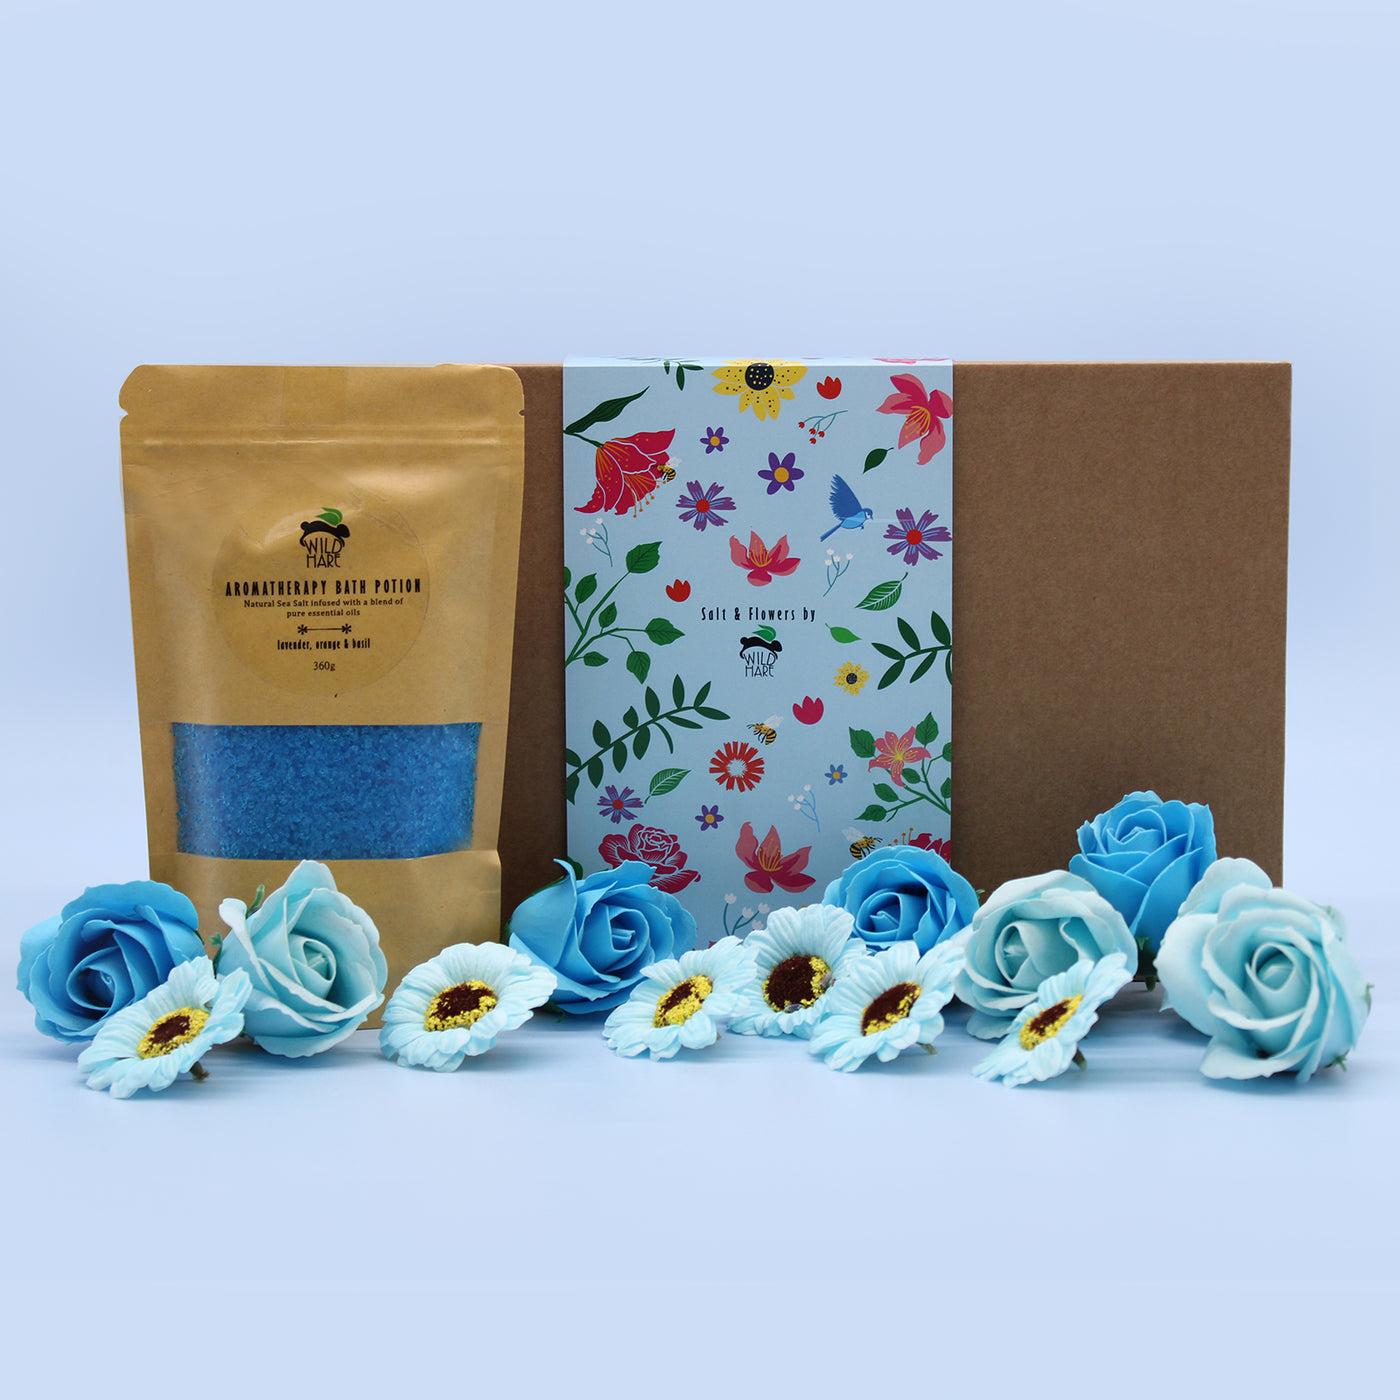 Wild Hare Salt & Flowers Bath Gift Set With Blue Roses And Sunflowers.